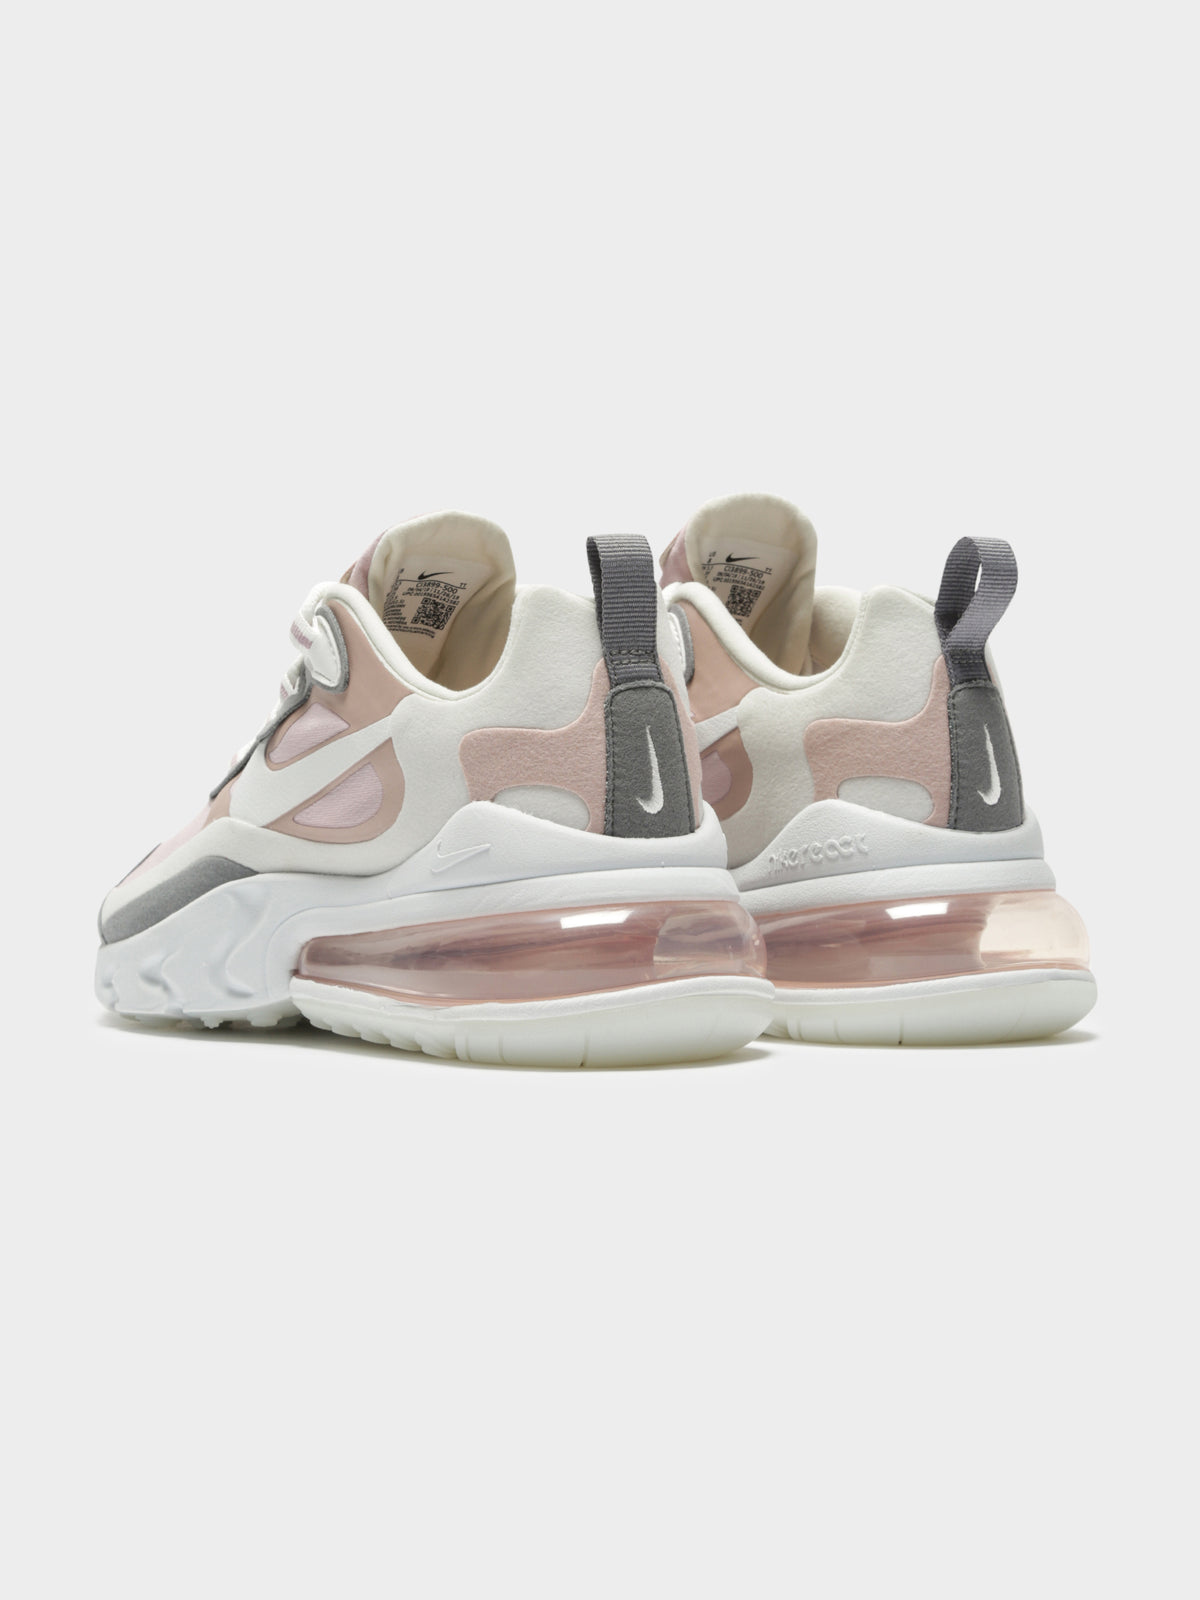 Womens Air Max React 270 Sneakers in Pink, White &amp; Grey